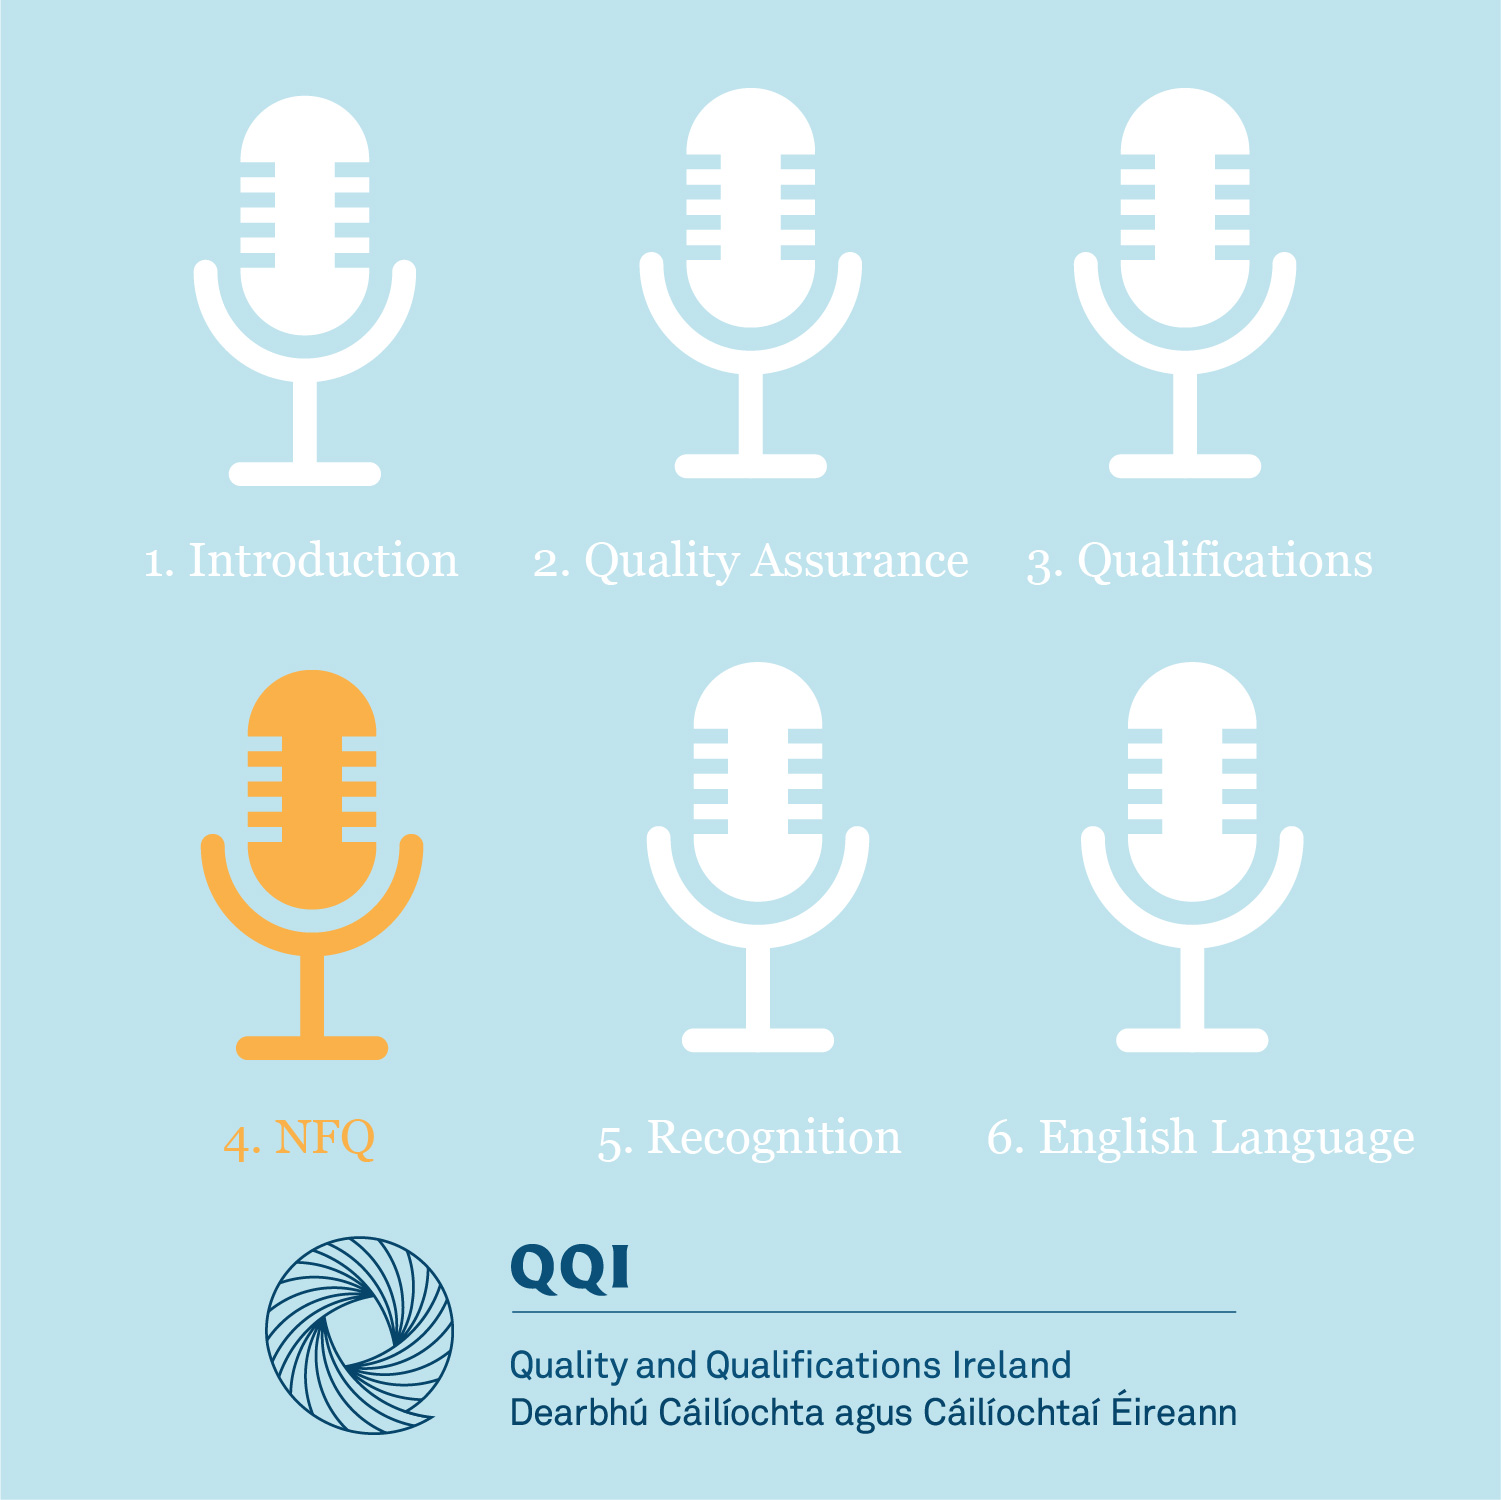 4. The National Framework of Qualifications (NFQ)